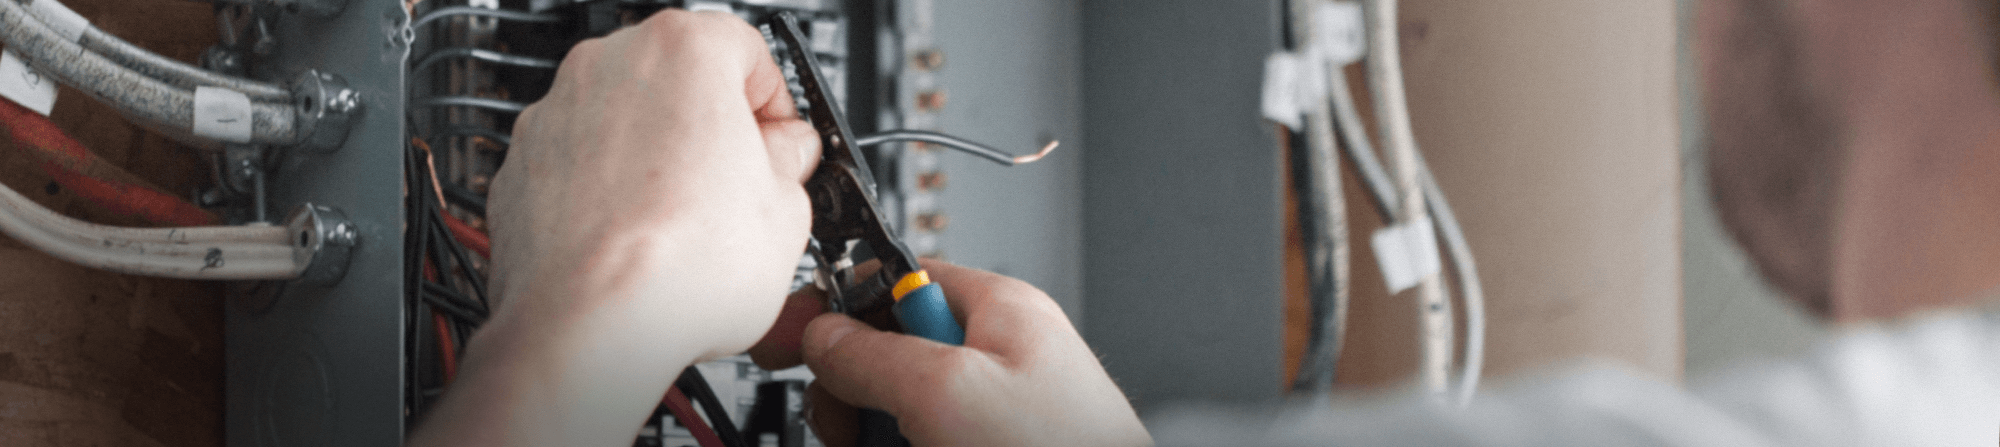 electrical repairs done right the first time